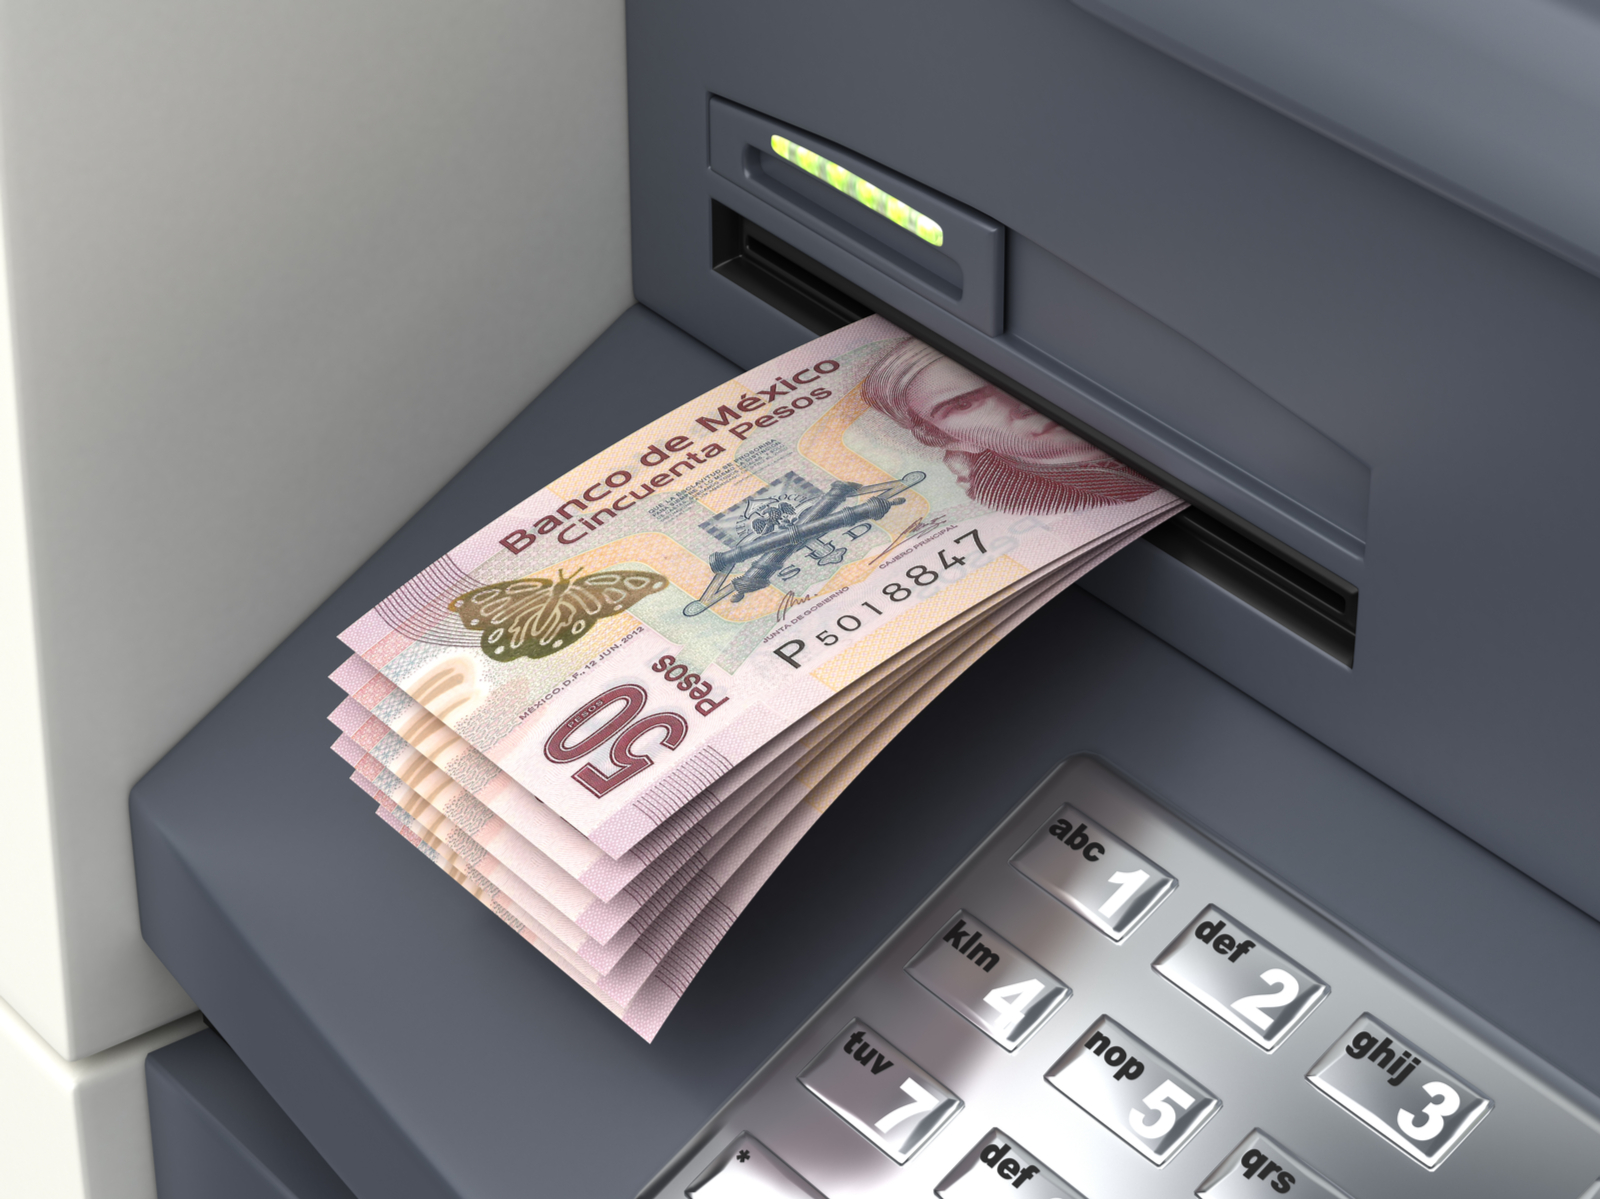 For a post on Is Mexico City Safe, a person withdrawing money from an ATM